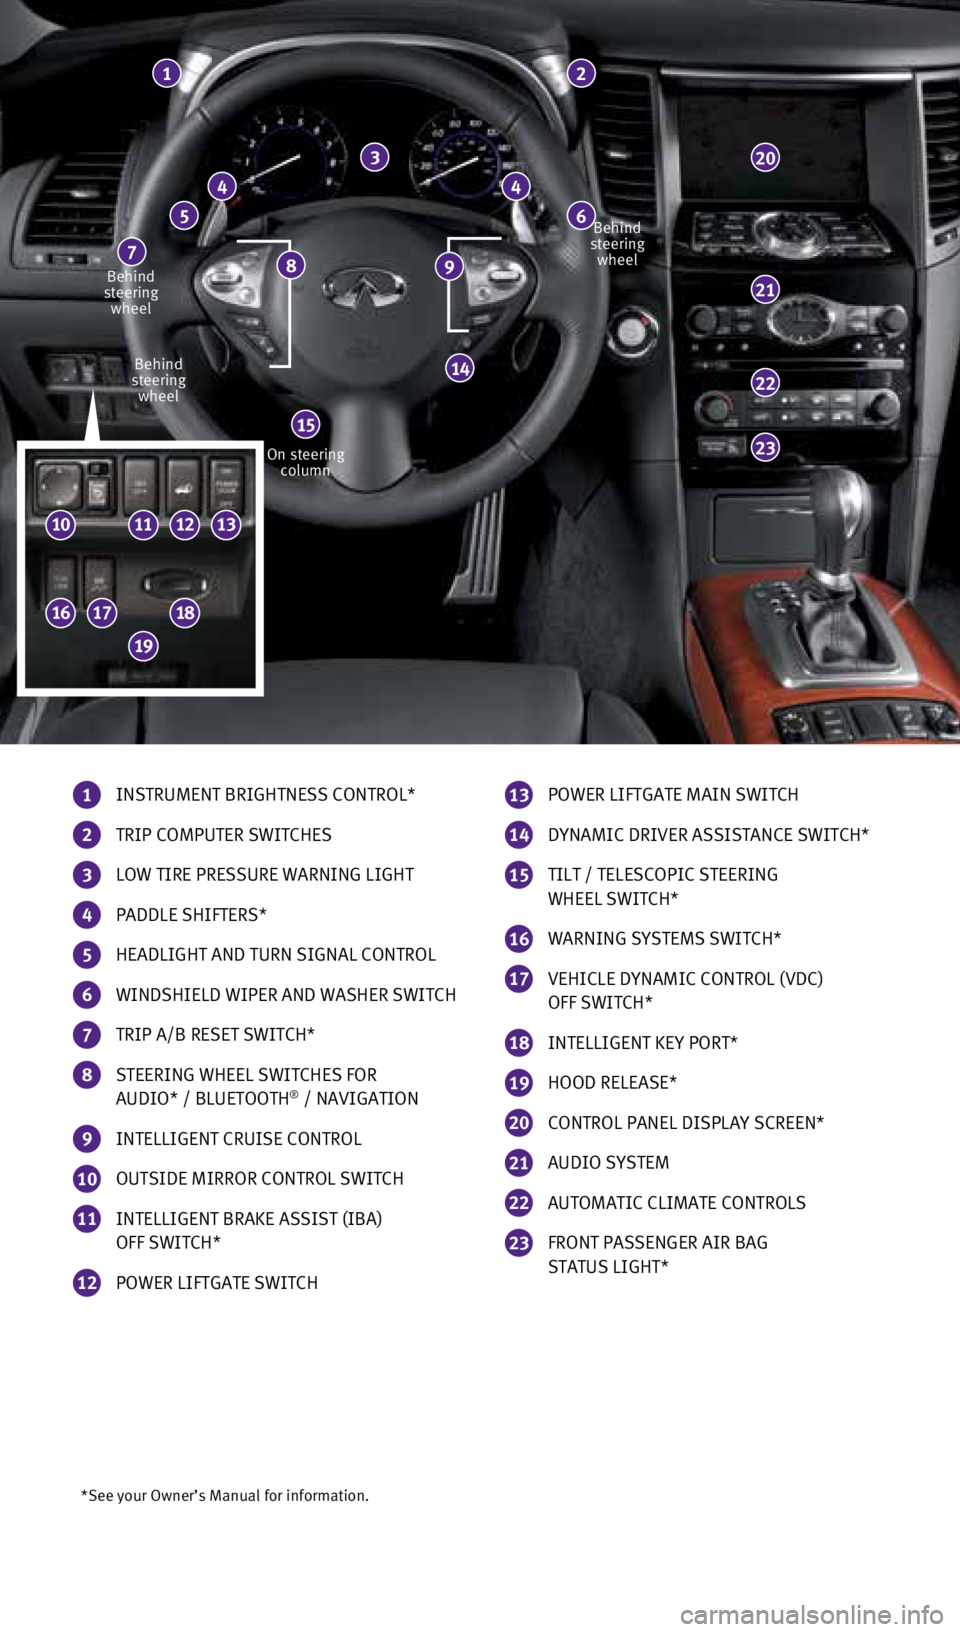 INFINITI QX70 2015  Quick Reference Guide *See your Owner’s Manual for information.
1 INSTRUMENT BRIGHTNESS CONTROL*
2 TRIP COMPUTER SWITCHES
3 LOW TIRE PRESSURE WARNING LIGHT
4 PADDLE SHIFTERS*
5 HEADLIGHT AND TURN SIGNAL CONTROL
6 WINDSHI